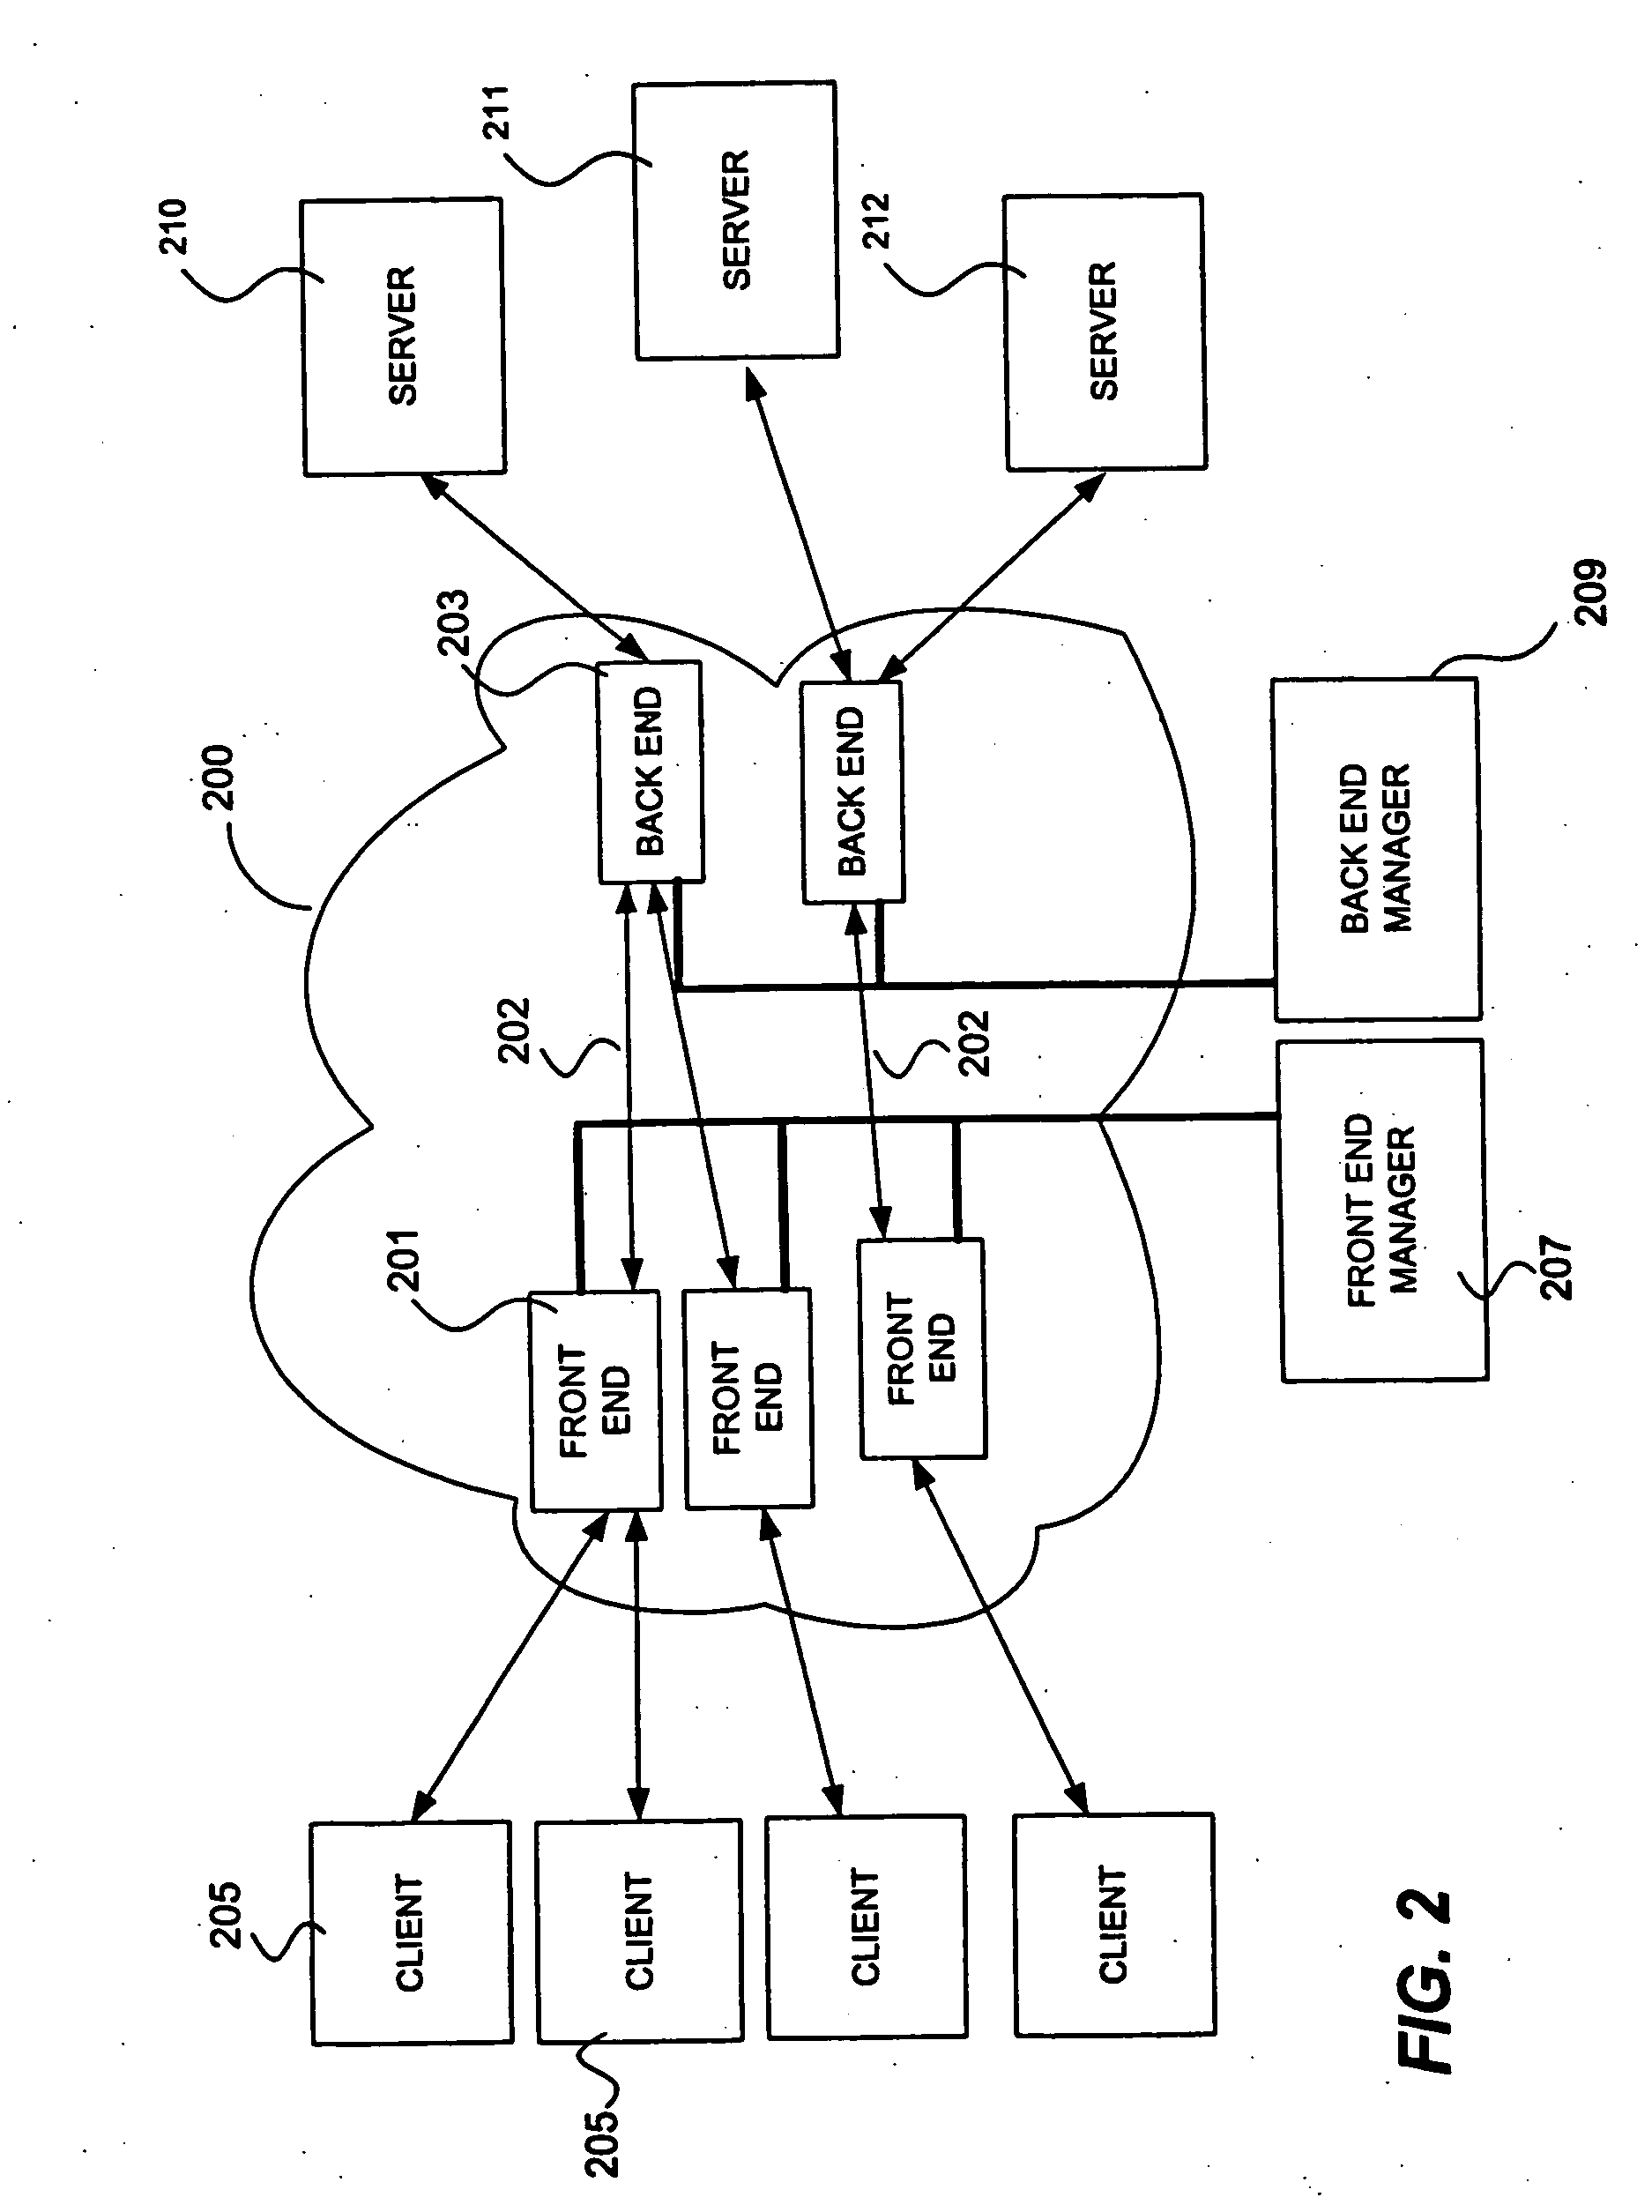 System and method for implementing application functionality within a network infrastructure